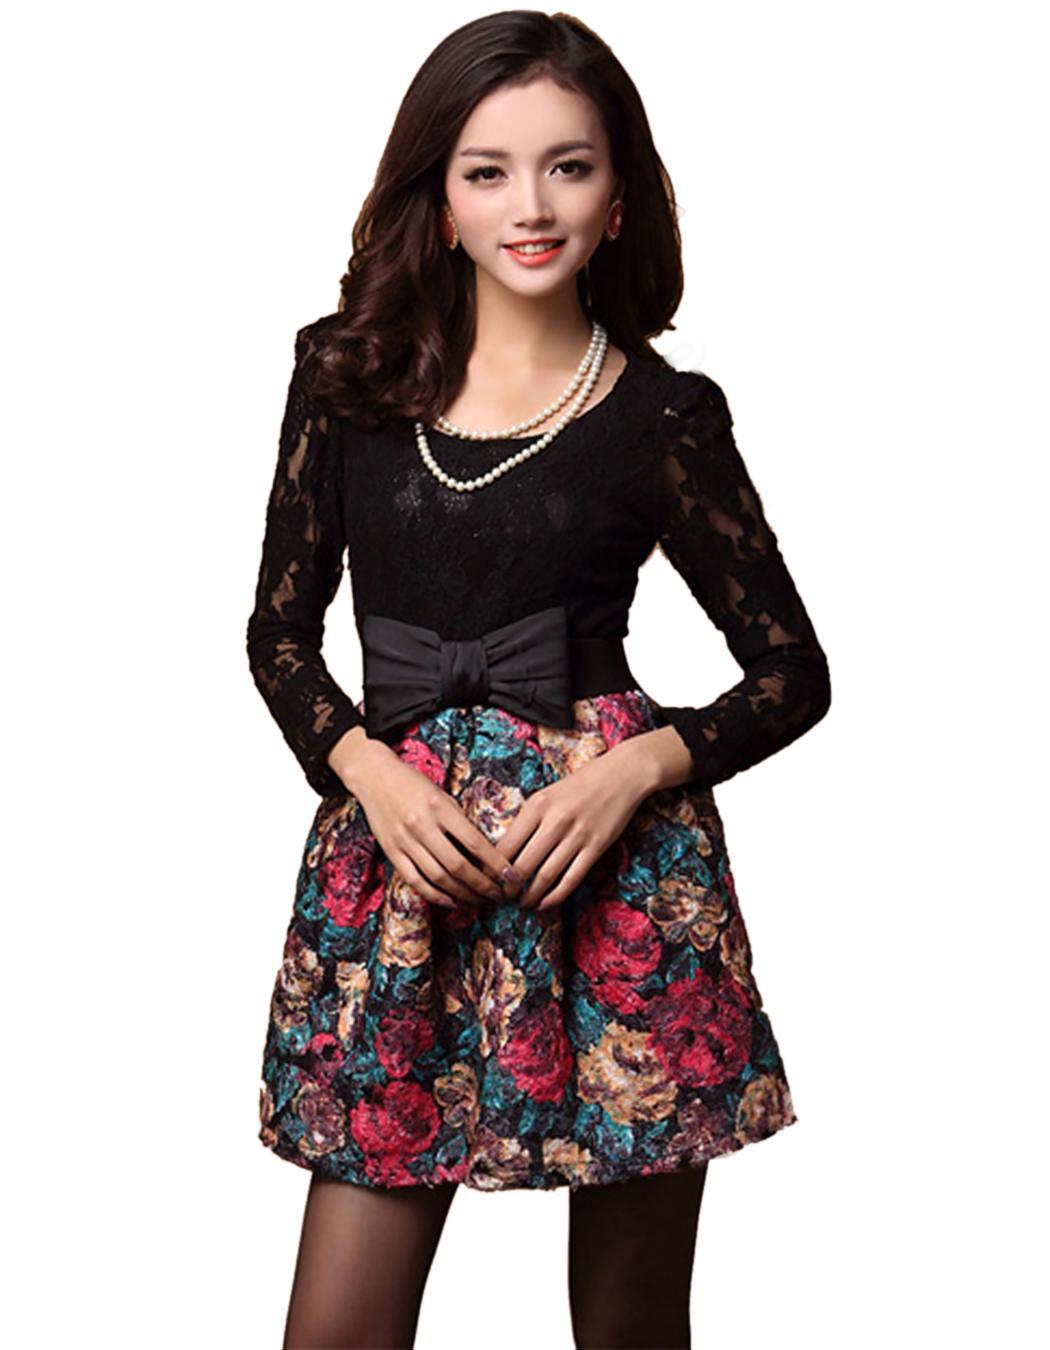 Sexy Women Floral Lace Skirt Party Evening Cocktail Long Sleeve Short Mini Dress Ebay 